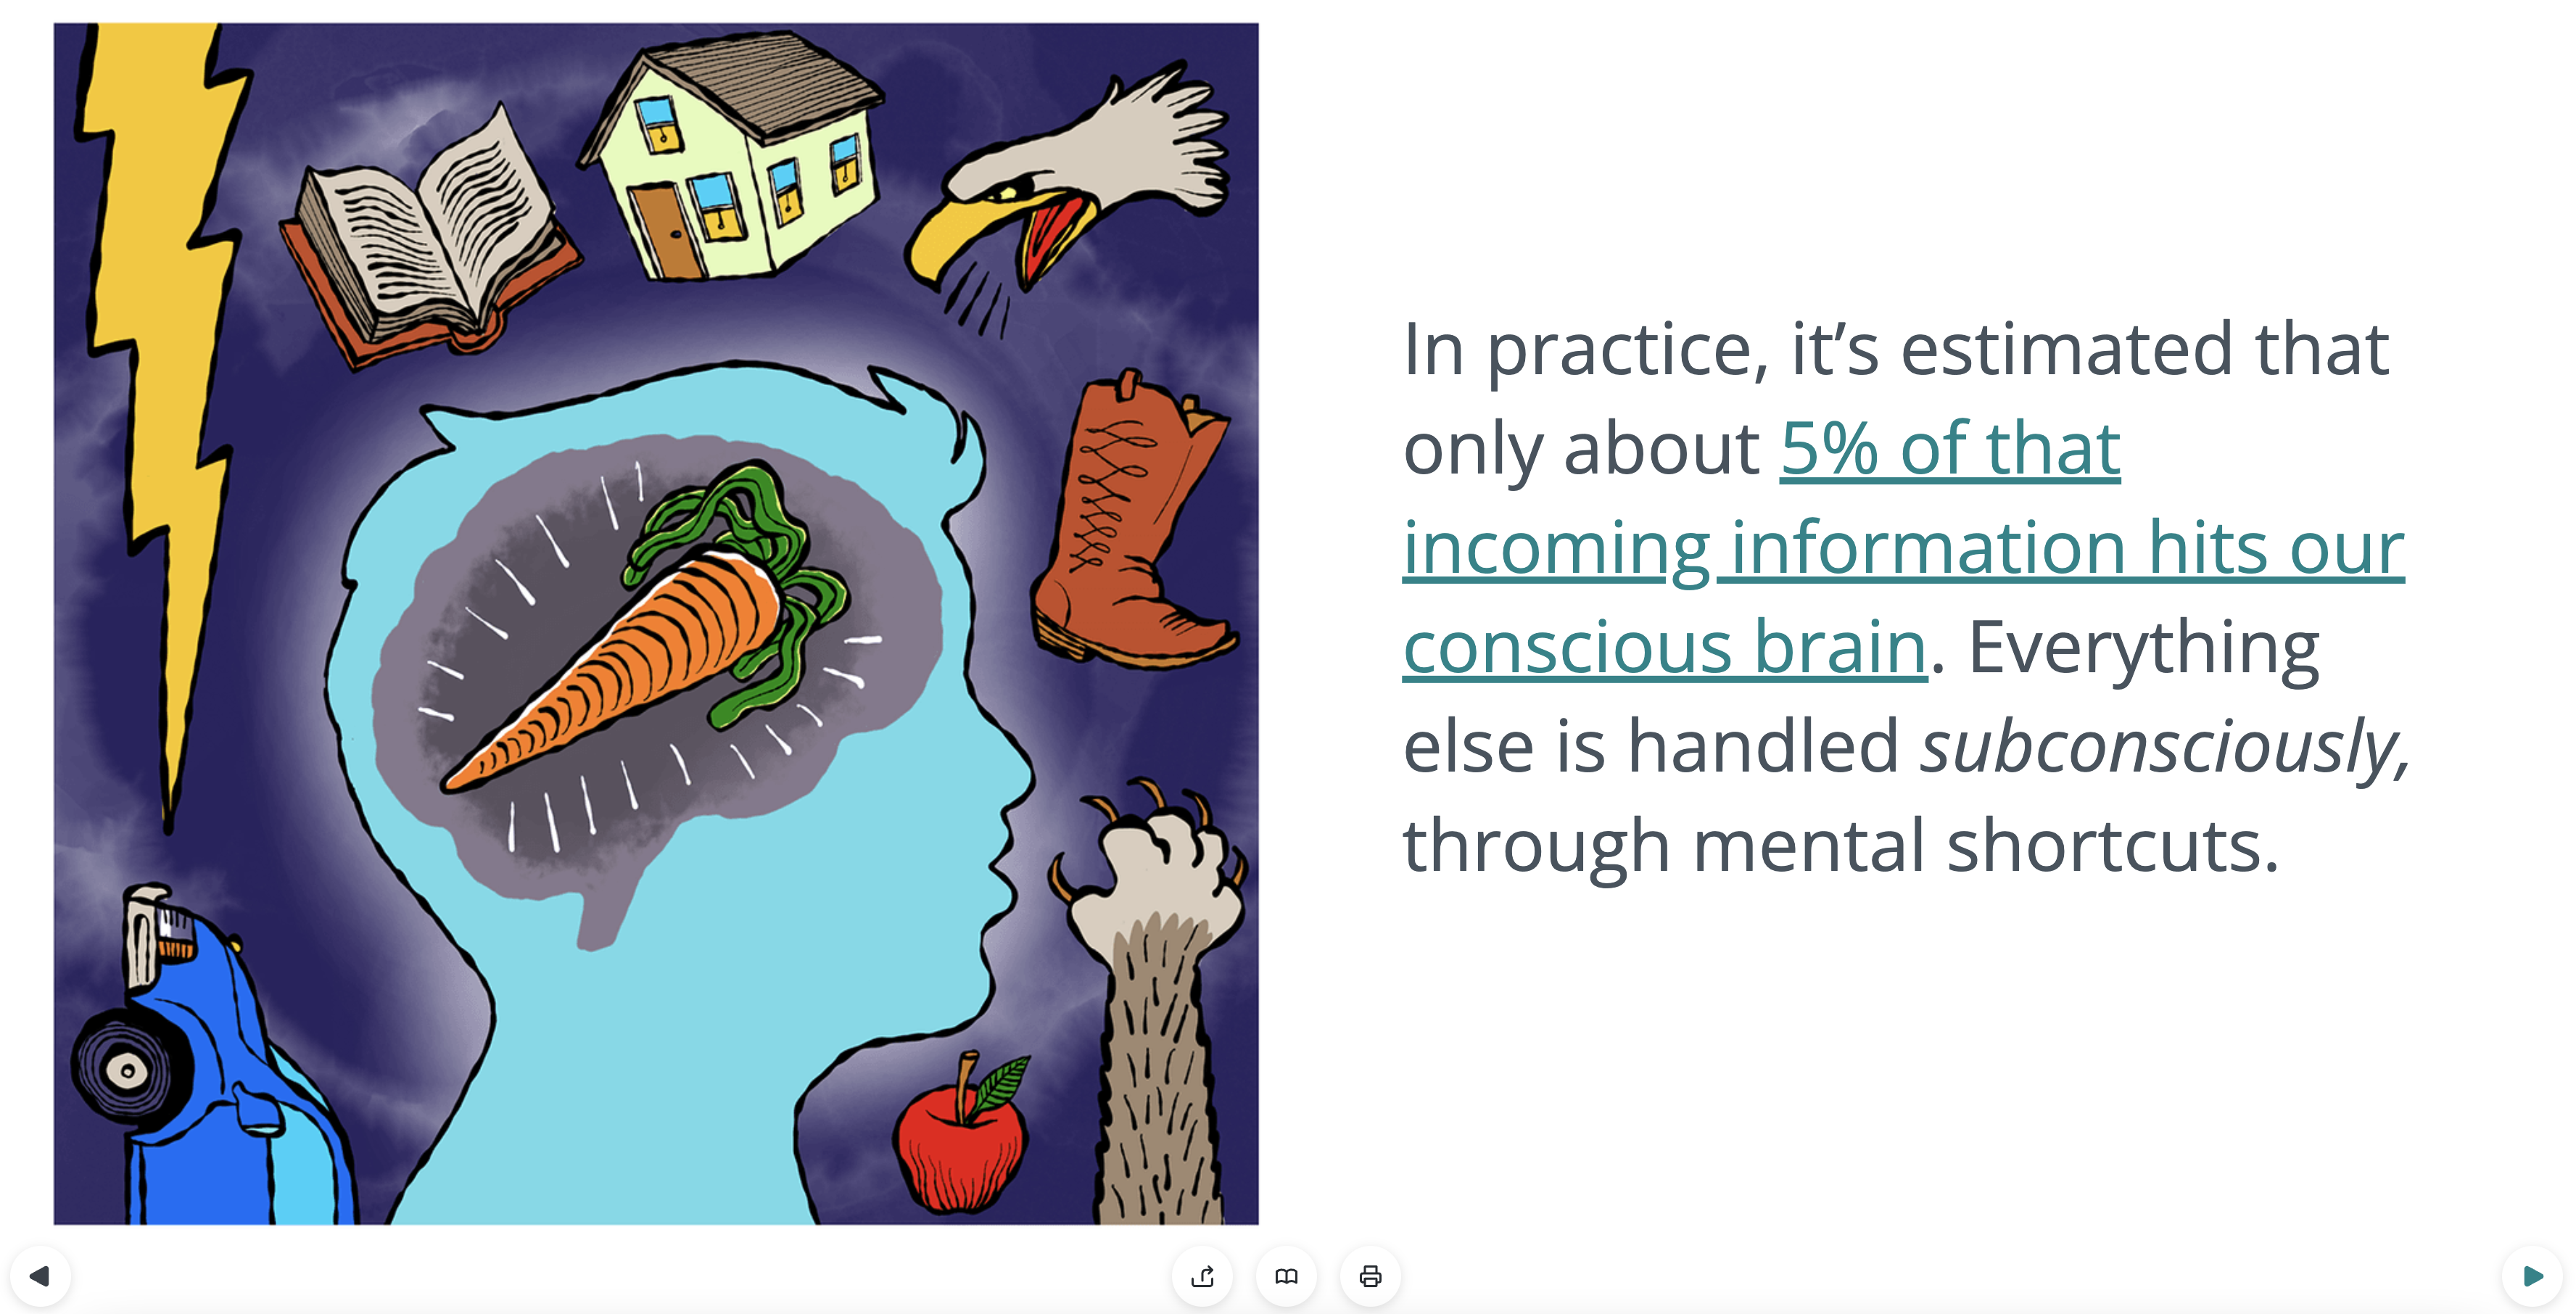 Screenshot from "What is Motivated Reasoning?" - 5% of incoming information hits concious brain - image of brain with a carrot in it surrounded by lots of other items not inside brain